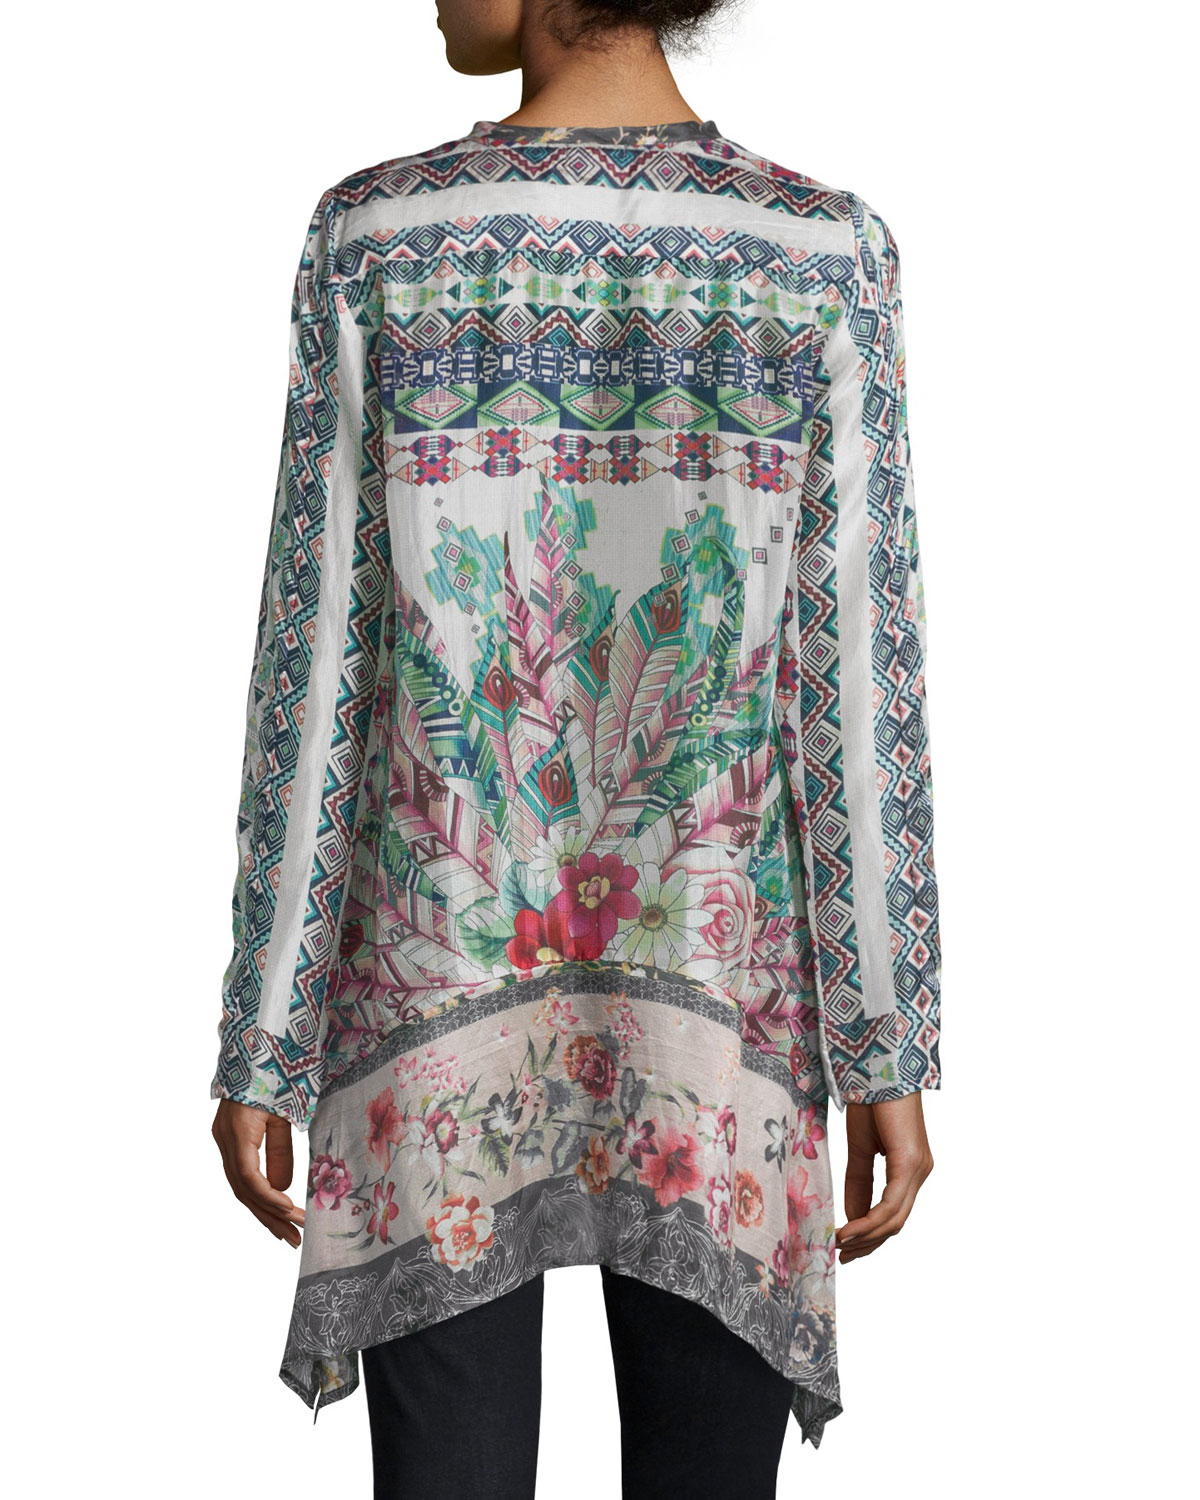 Lyst - Johnny Was Tribeca Printed Georgette Tunic